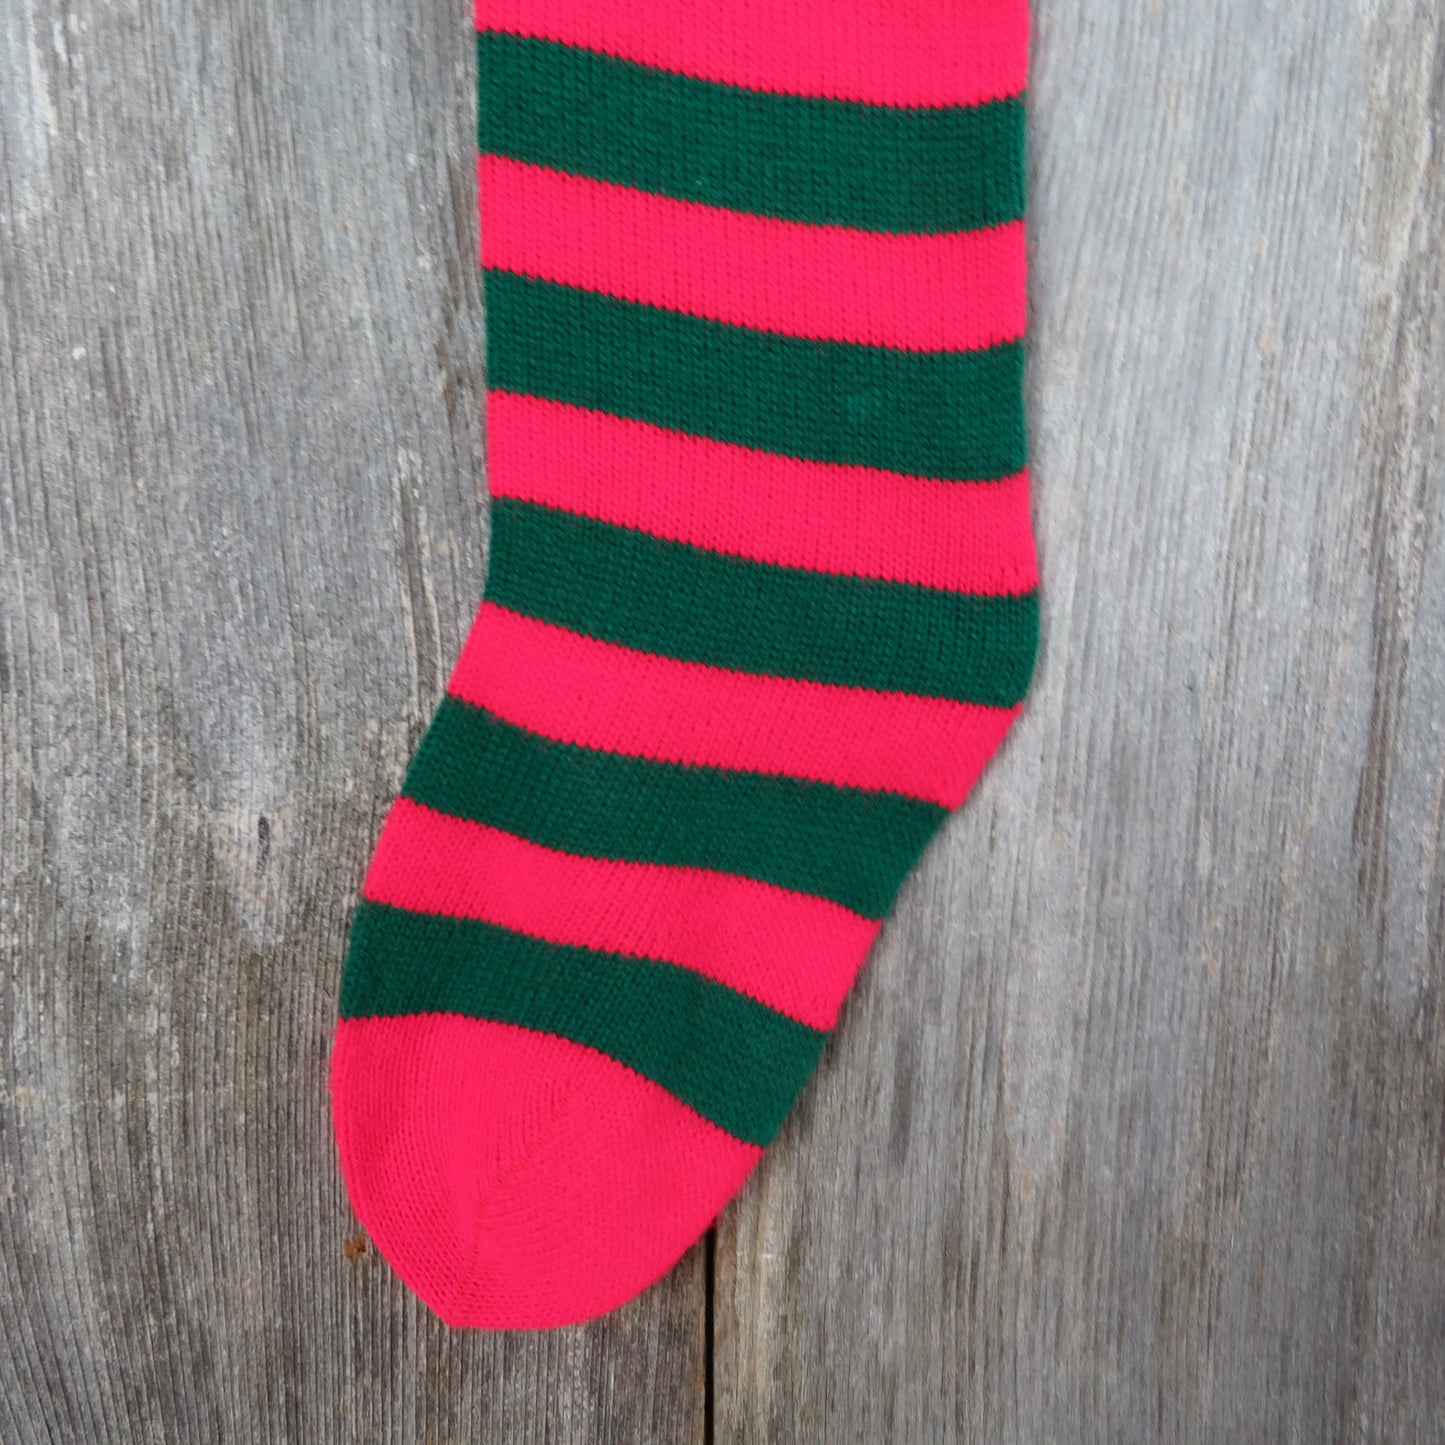 Vintage Knit Striped Christmas Stocking Red Green Stripes Knitted 1980s